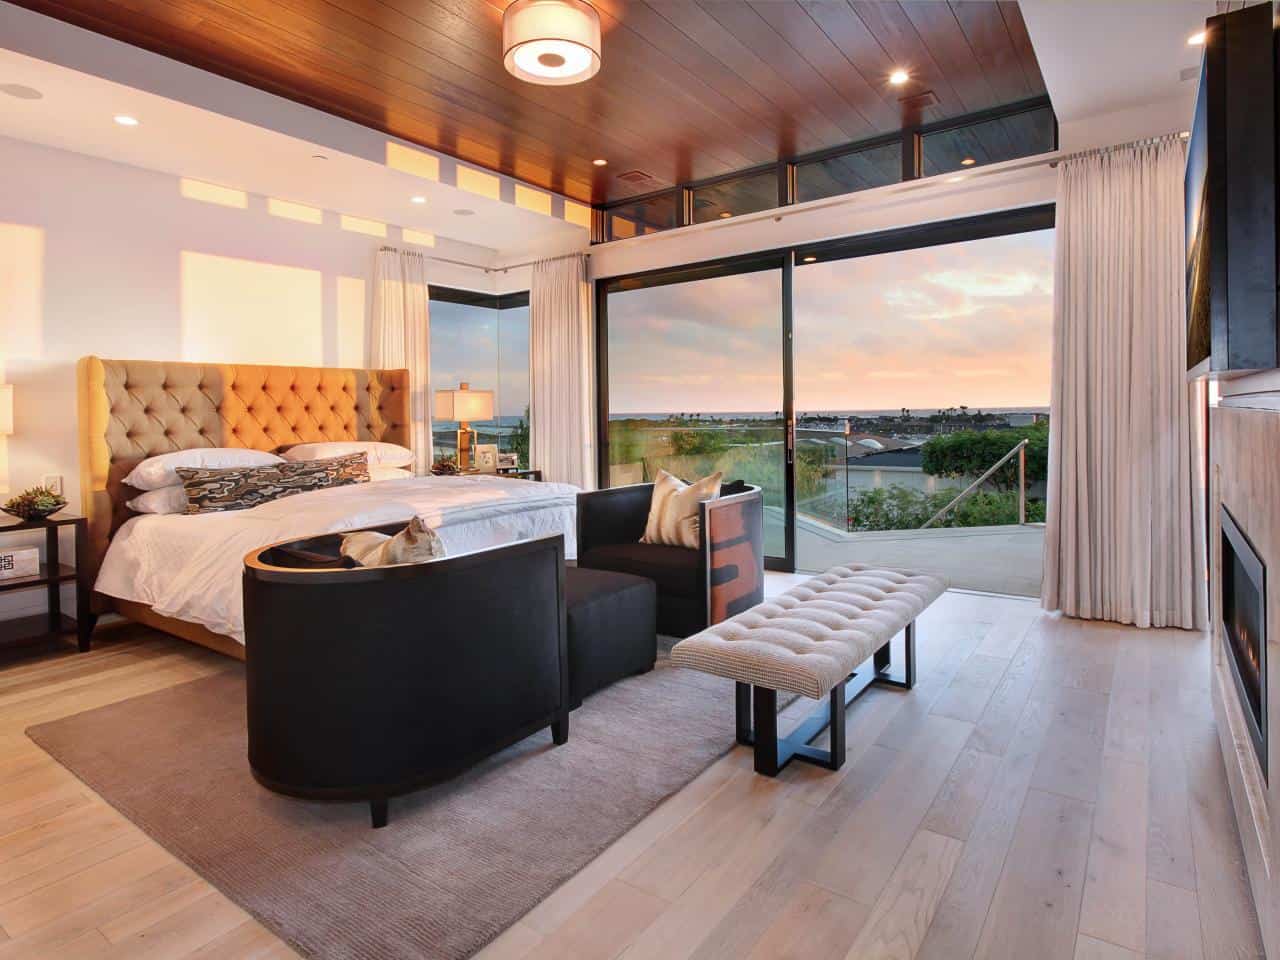 kevin-smith-gorgeous-master-bedroom-with-wood-ceiling-accent